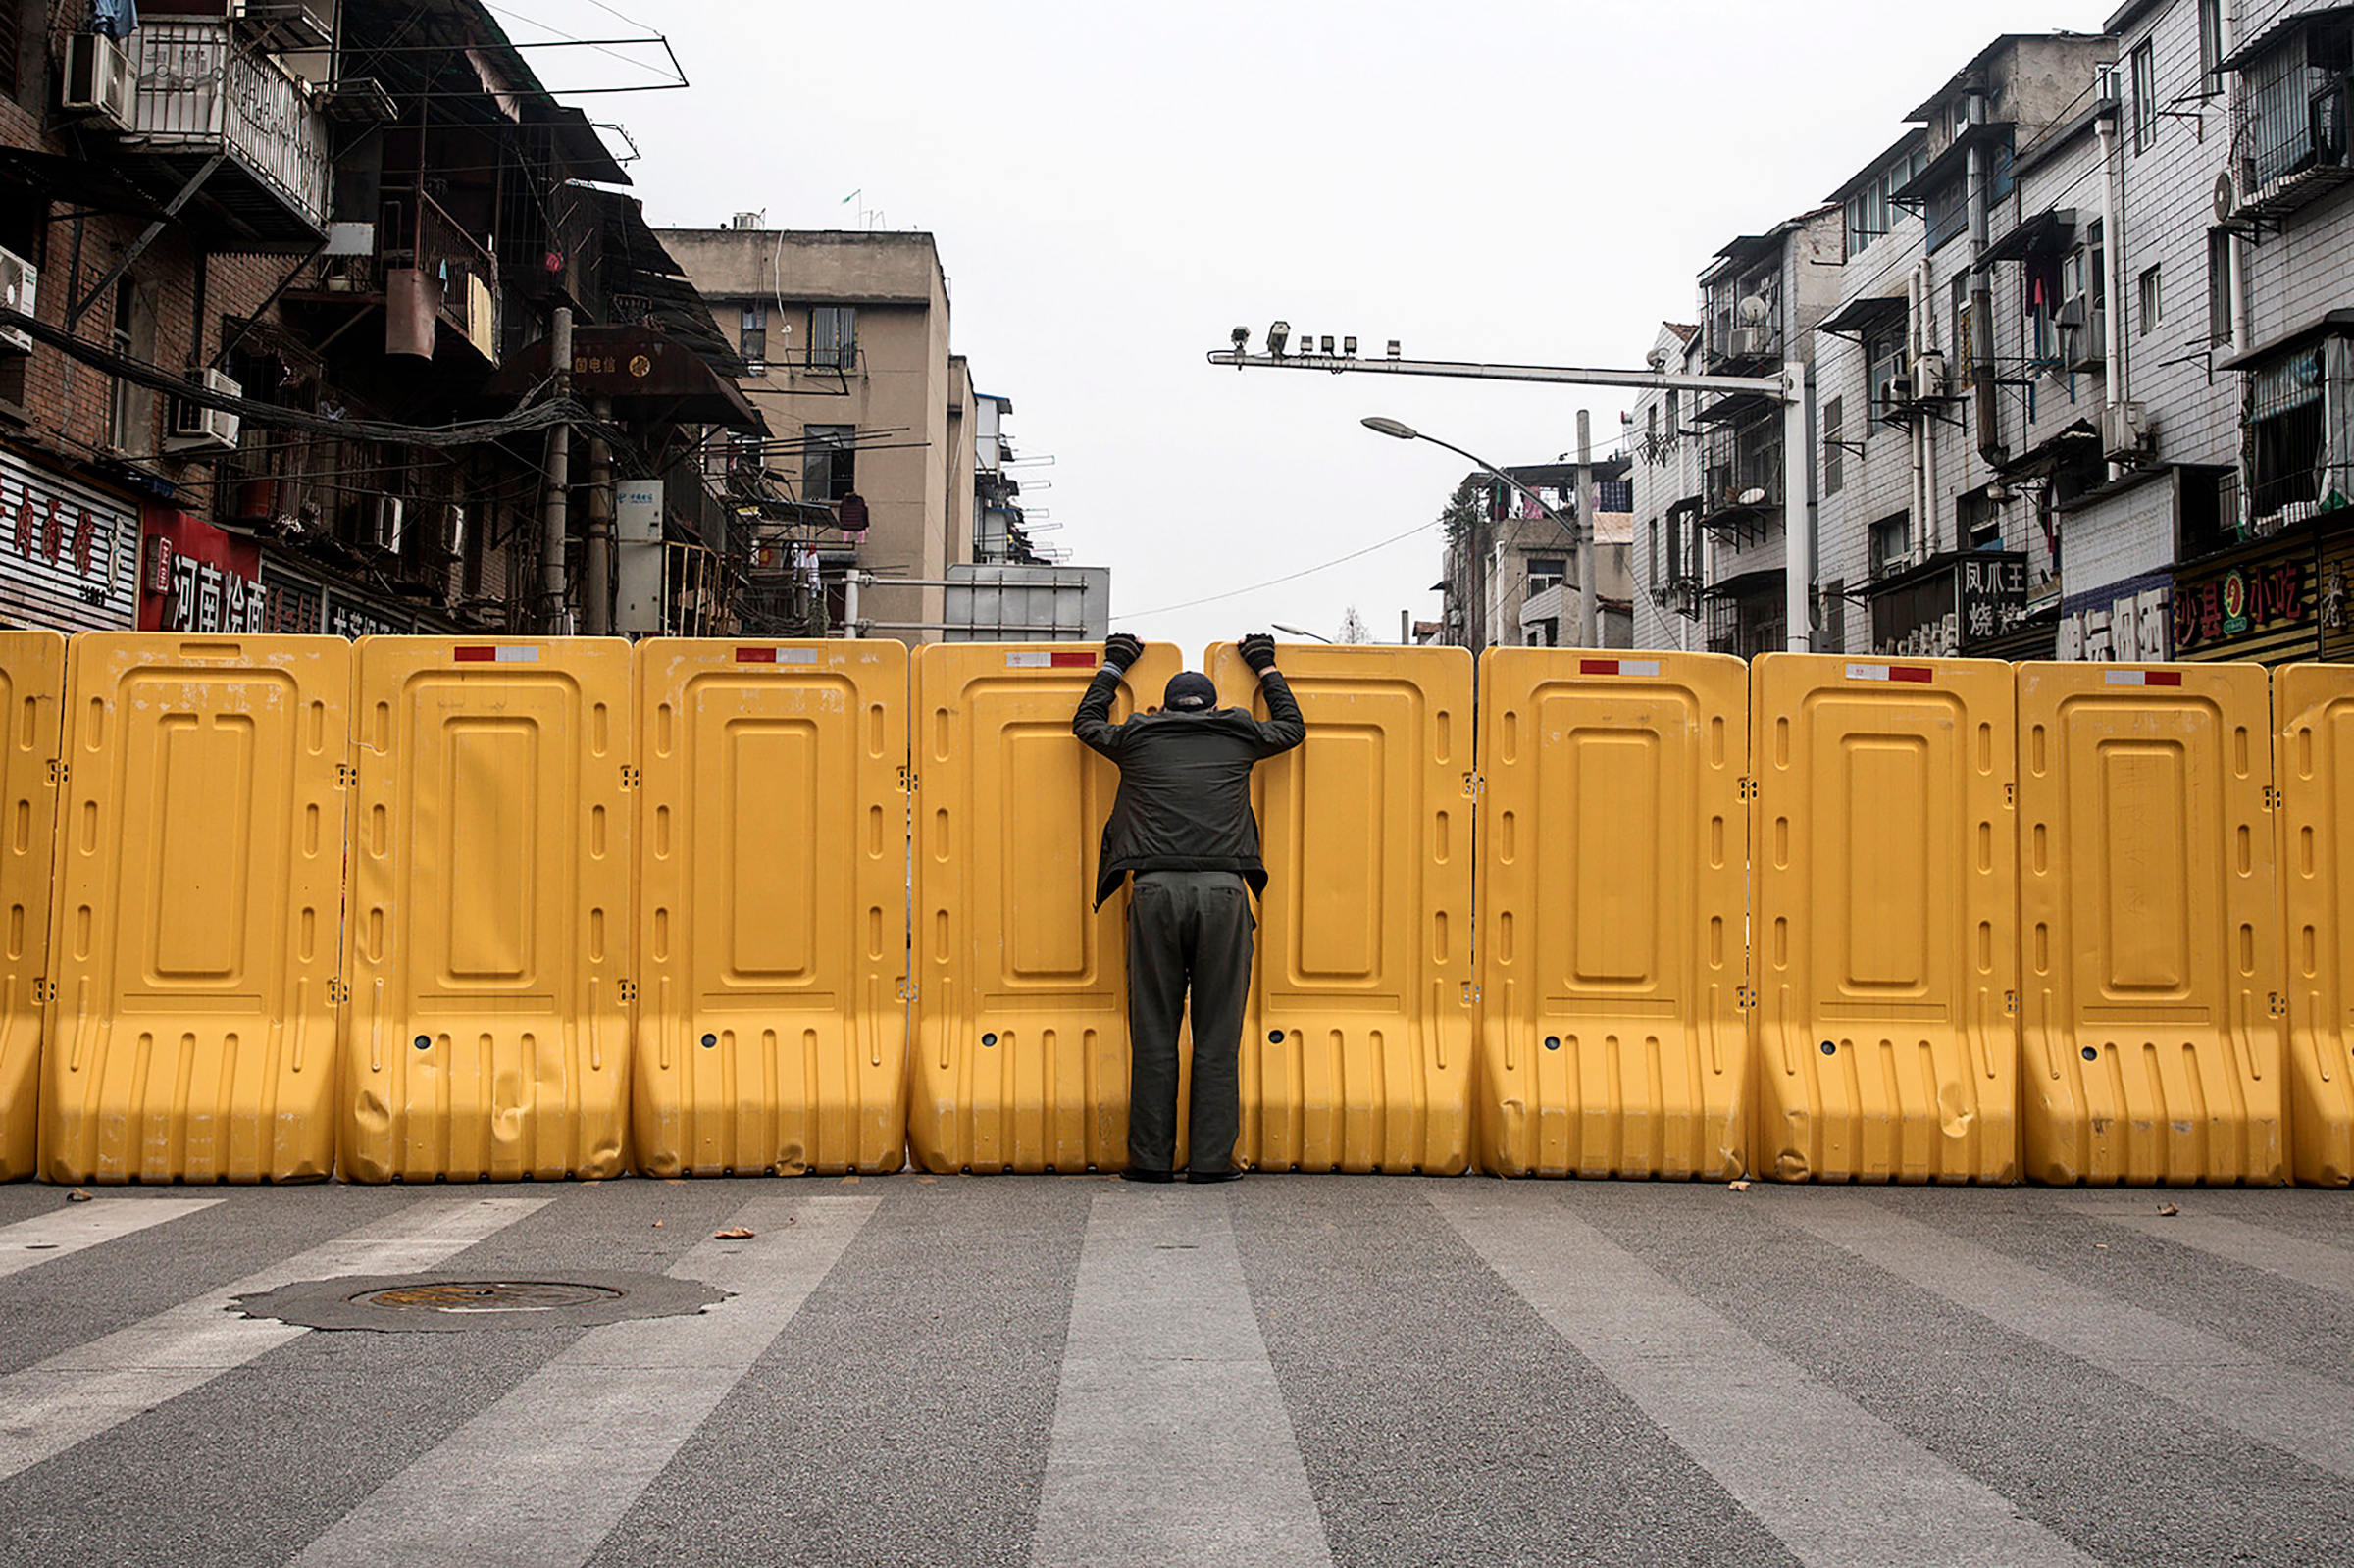 A man talks to another man through a makeshift barricade, built to control entry and exit to a residential compound, in Wuhan, China, on March 8. (Getty Images)